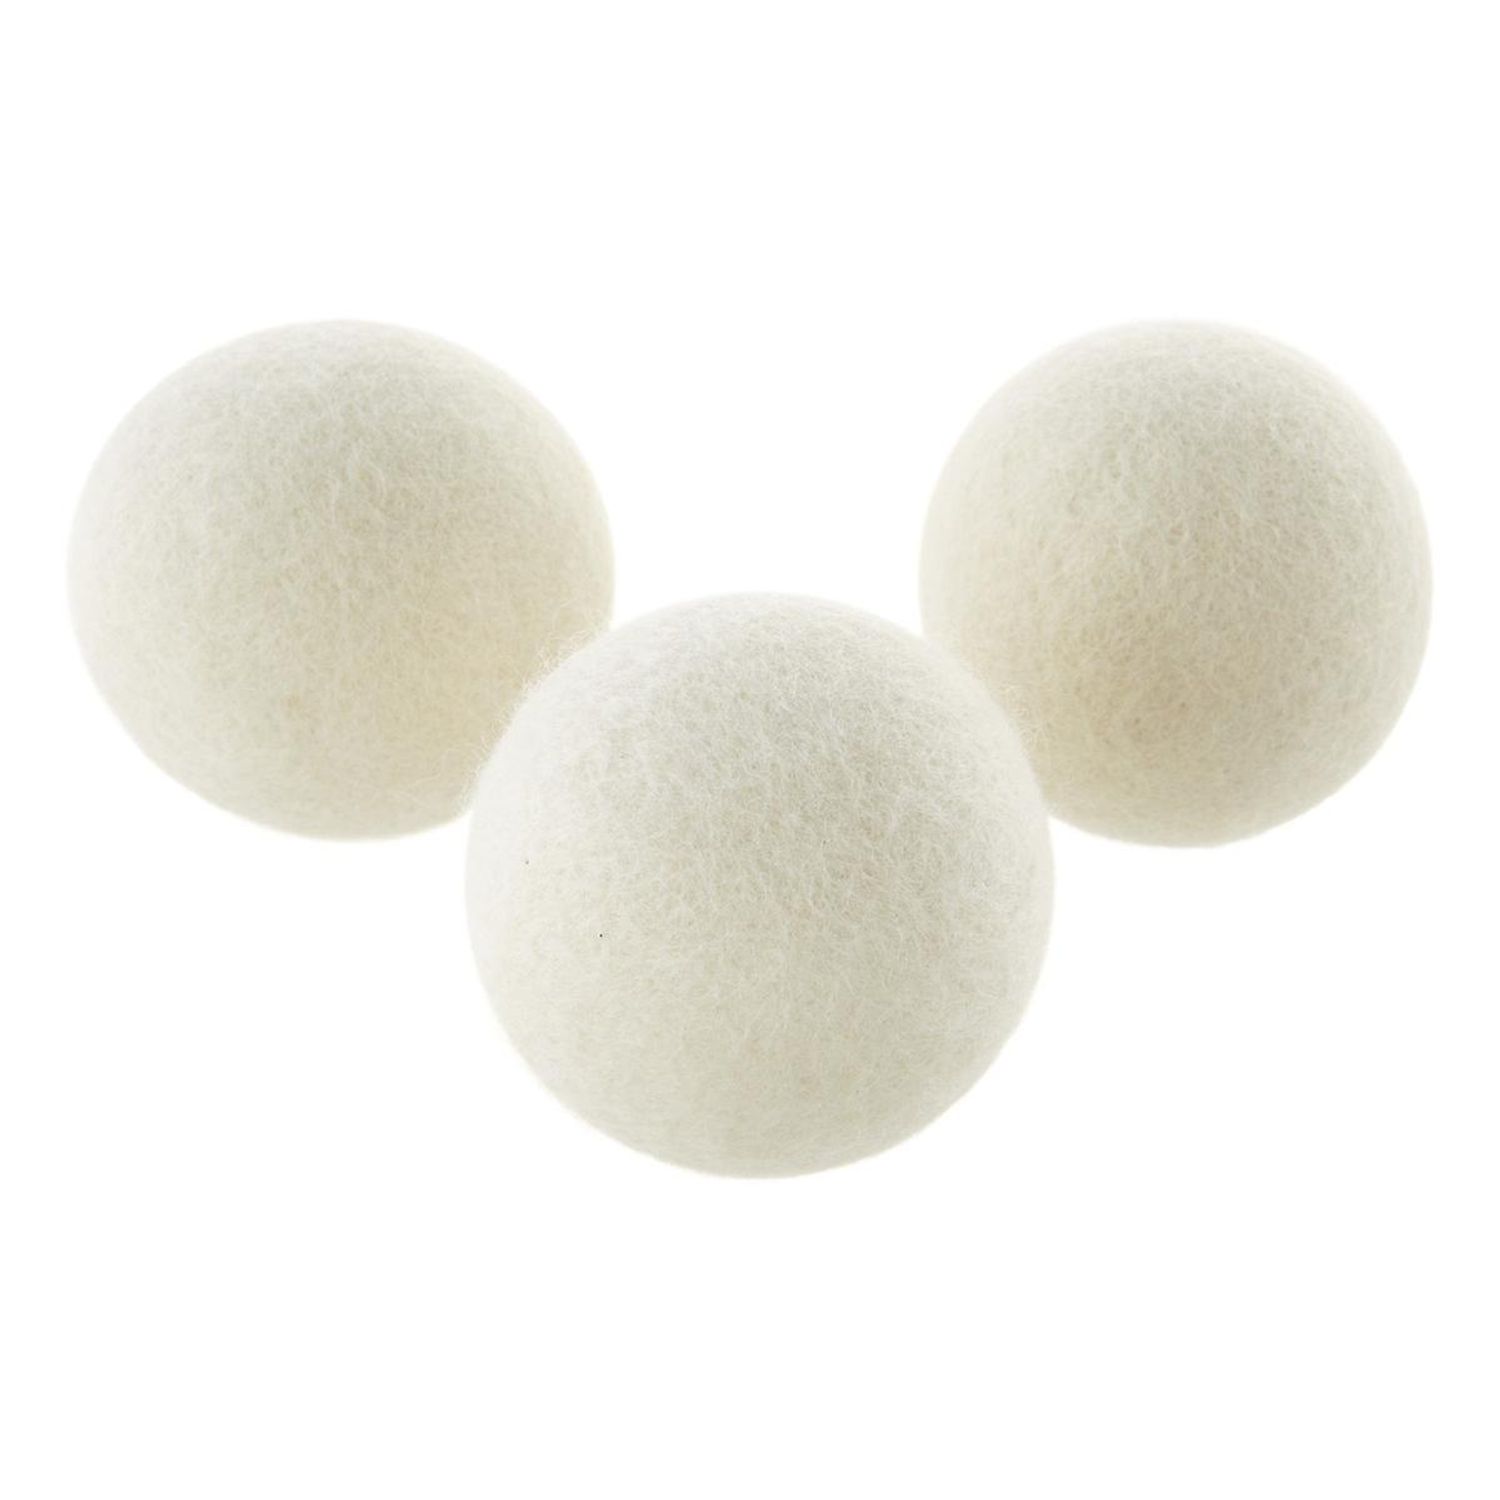 Shop Wool Dryer Balls, 2 packages from The Container Store on Openhaus